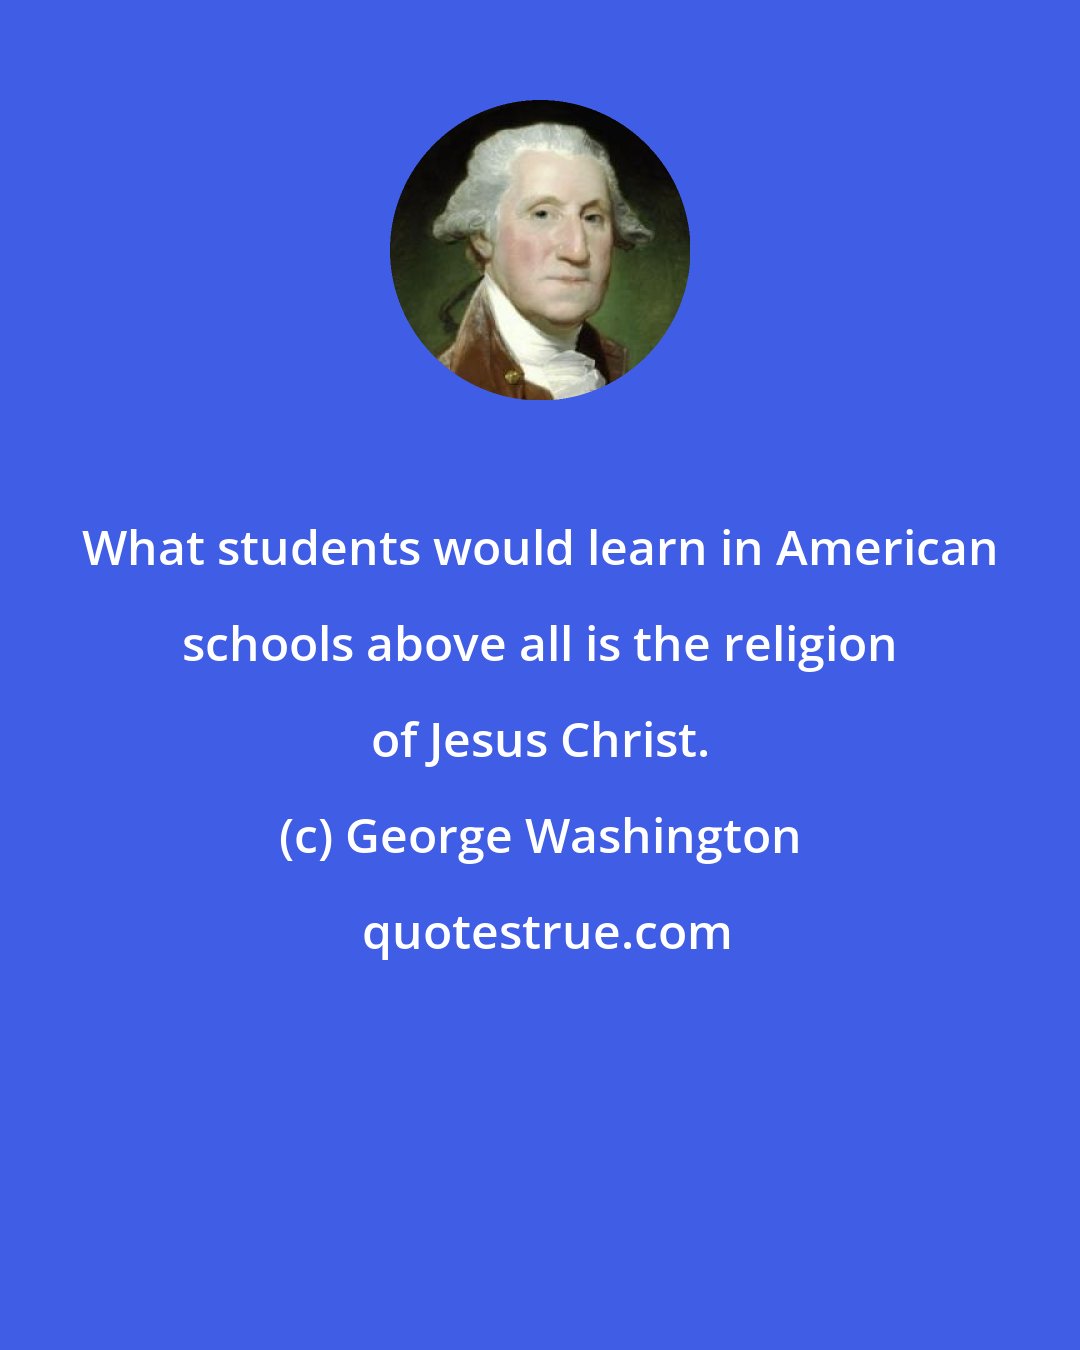 George Washington: What students would learn in American schools above all is the religion of Jesus Christ.